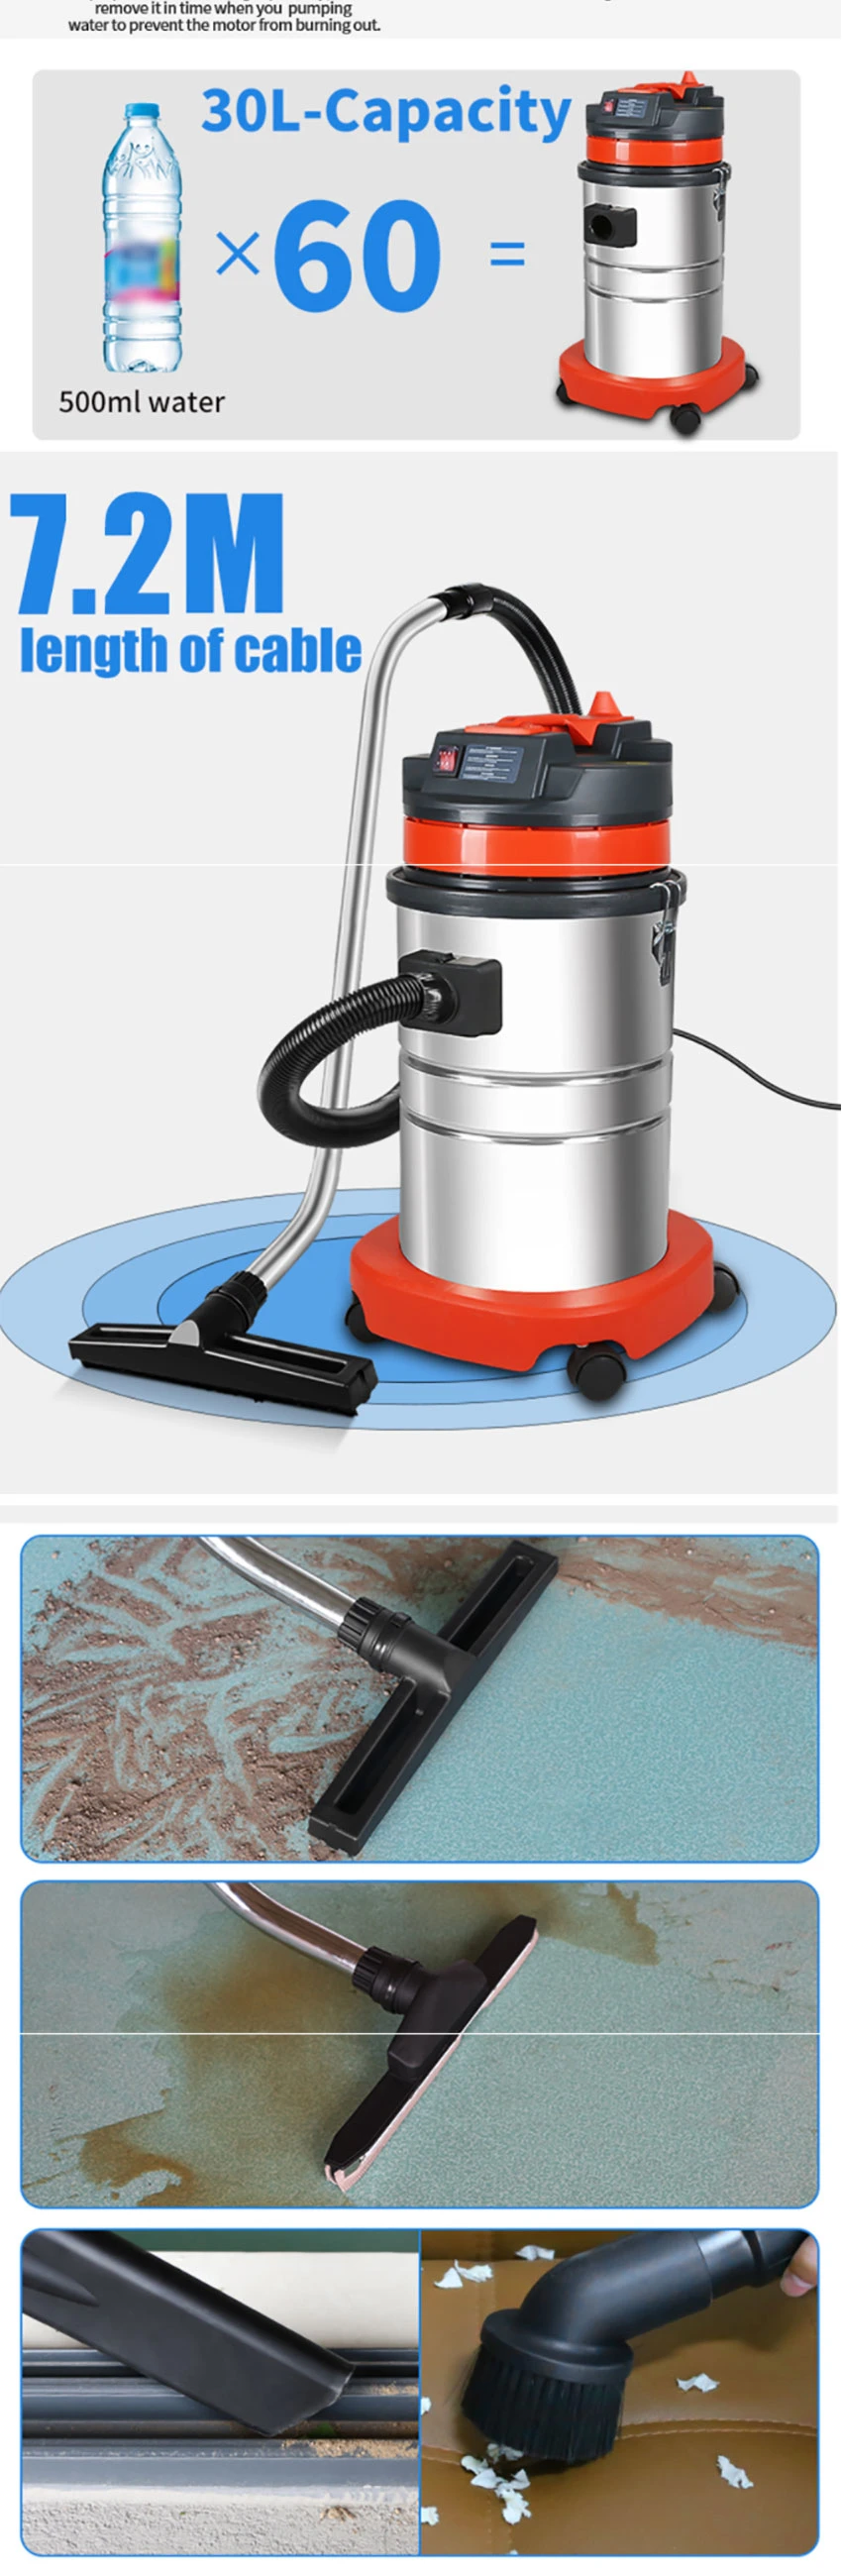 Vacum Cleaner Dry and Wet for Home Customized Wood Dry Sauna and Wet Steam Combined Wet and Dry Vacuum Cleaner for Car